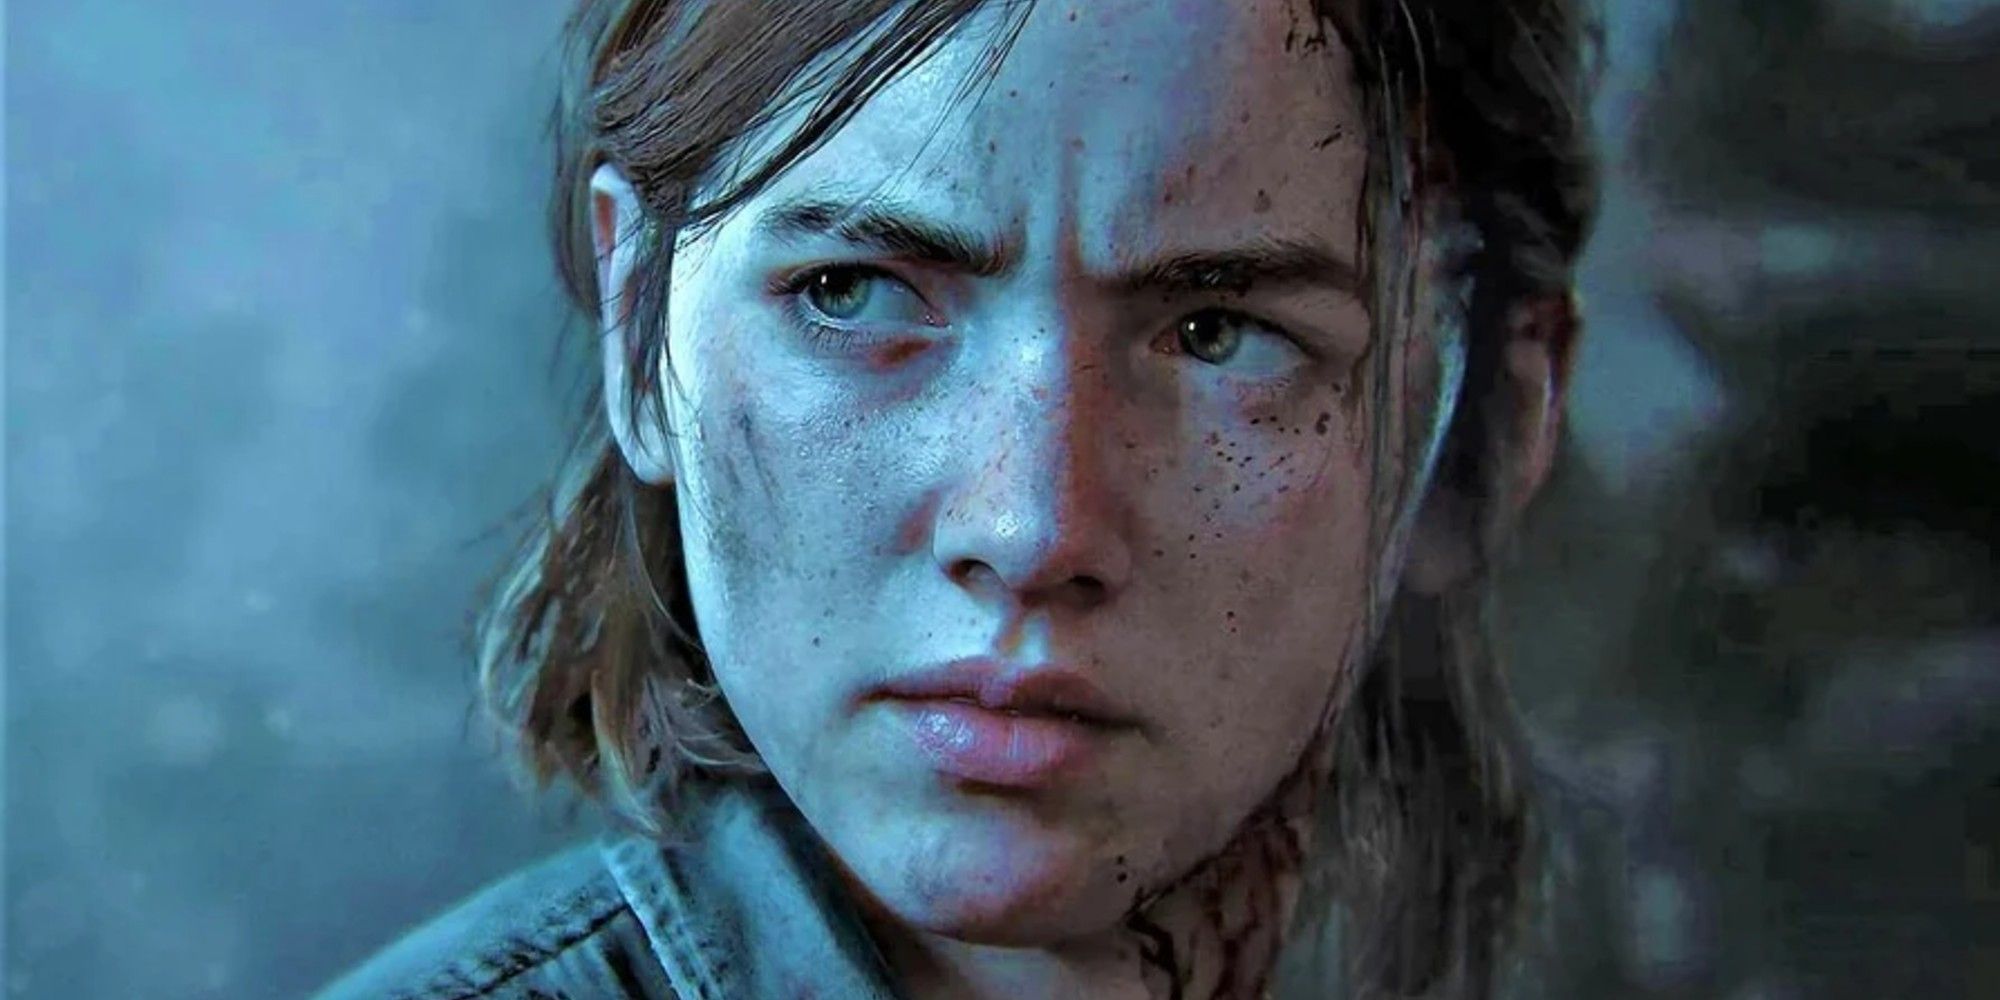 Ellie from the Last of Us 2